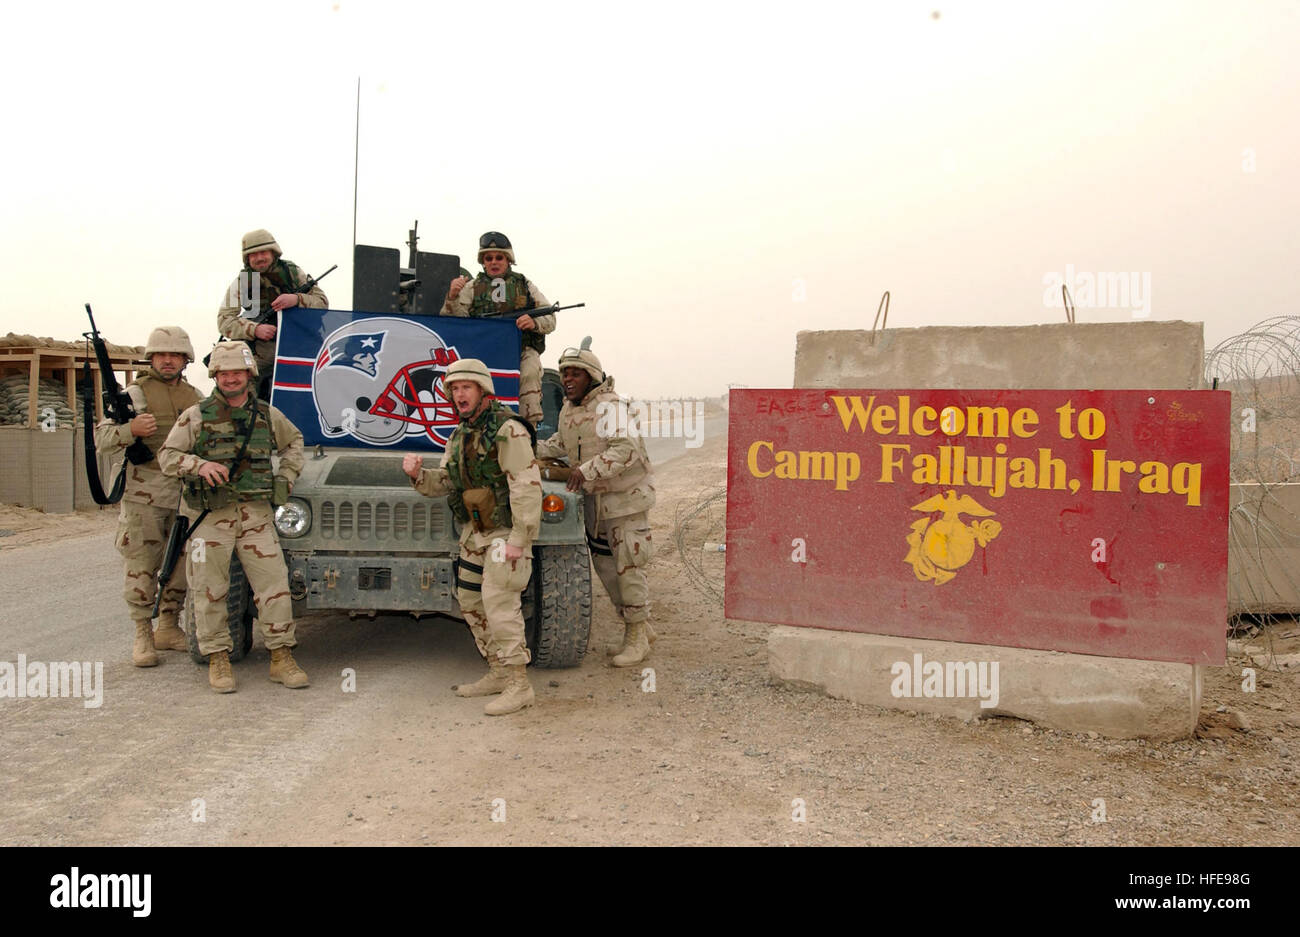 050201-N-1810F-037 Camp Fallujah, Iraq (Feb. 1, 2005) Ð U.S. Navy Seabees assigned to the I Marine Expeditionary Force Engineer group (I MEG) display their teamÕs colors for the upcoming National Football League Super Bowl XXXIX between the New England Patriots and the Philadelphia Eagles. I MEG Seabees are providing engineering and construction support to U.S. Marines and coalition forces in Iraq.  U.S. Navy photo by PhotographerÕs Mate 3rd Class Todd Frantom  (RELEASED) US Navy 050201-N-1810F-037 U.S. Navy Seabees assigned to the I Marine Expeditionary Force Engineer group (I MEG) display th Stock Photo